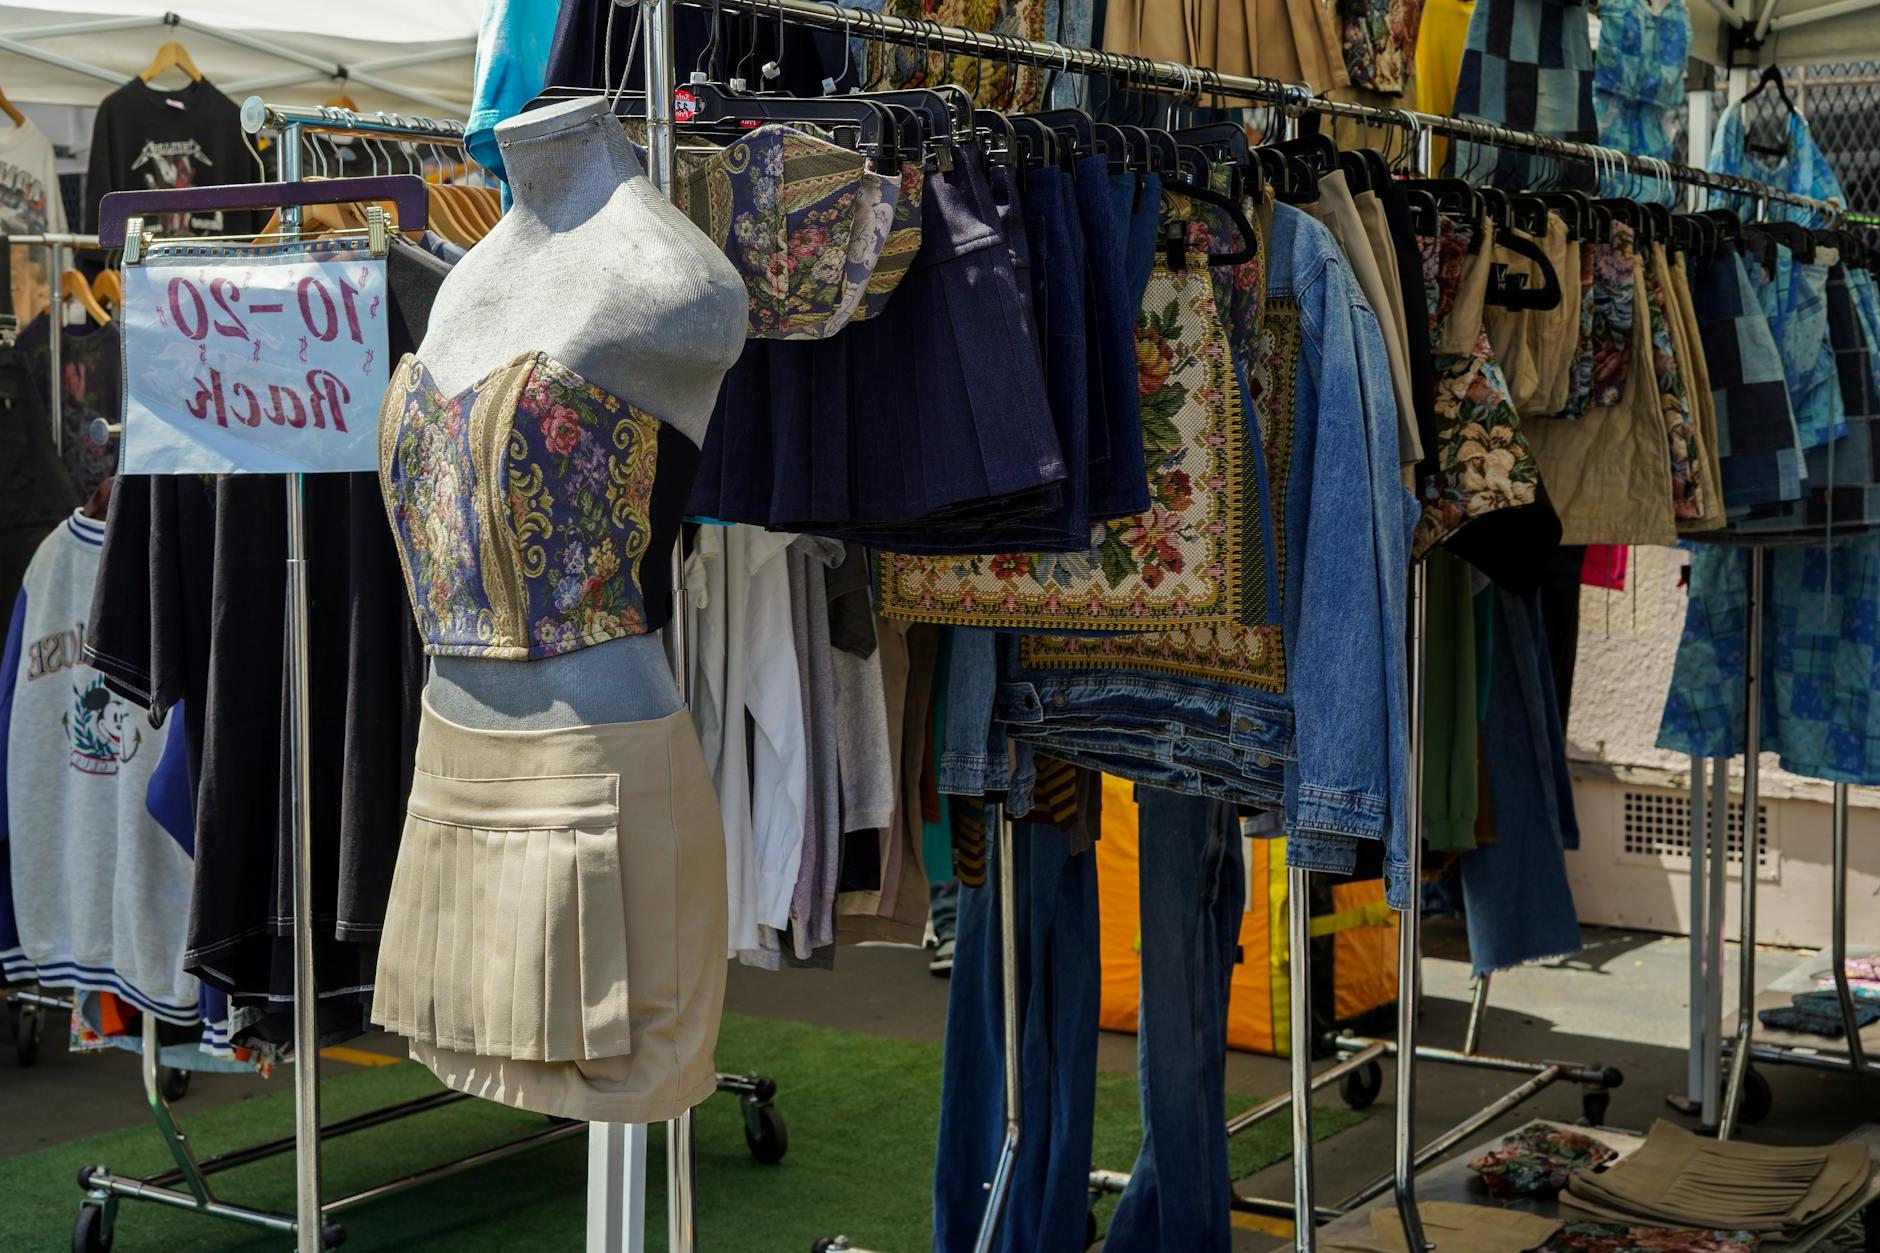 Close-up of Clothes Hanging on a Clothing Rack at a Flea Market